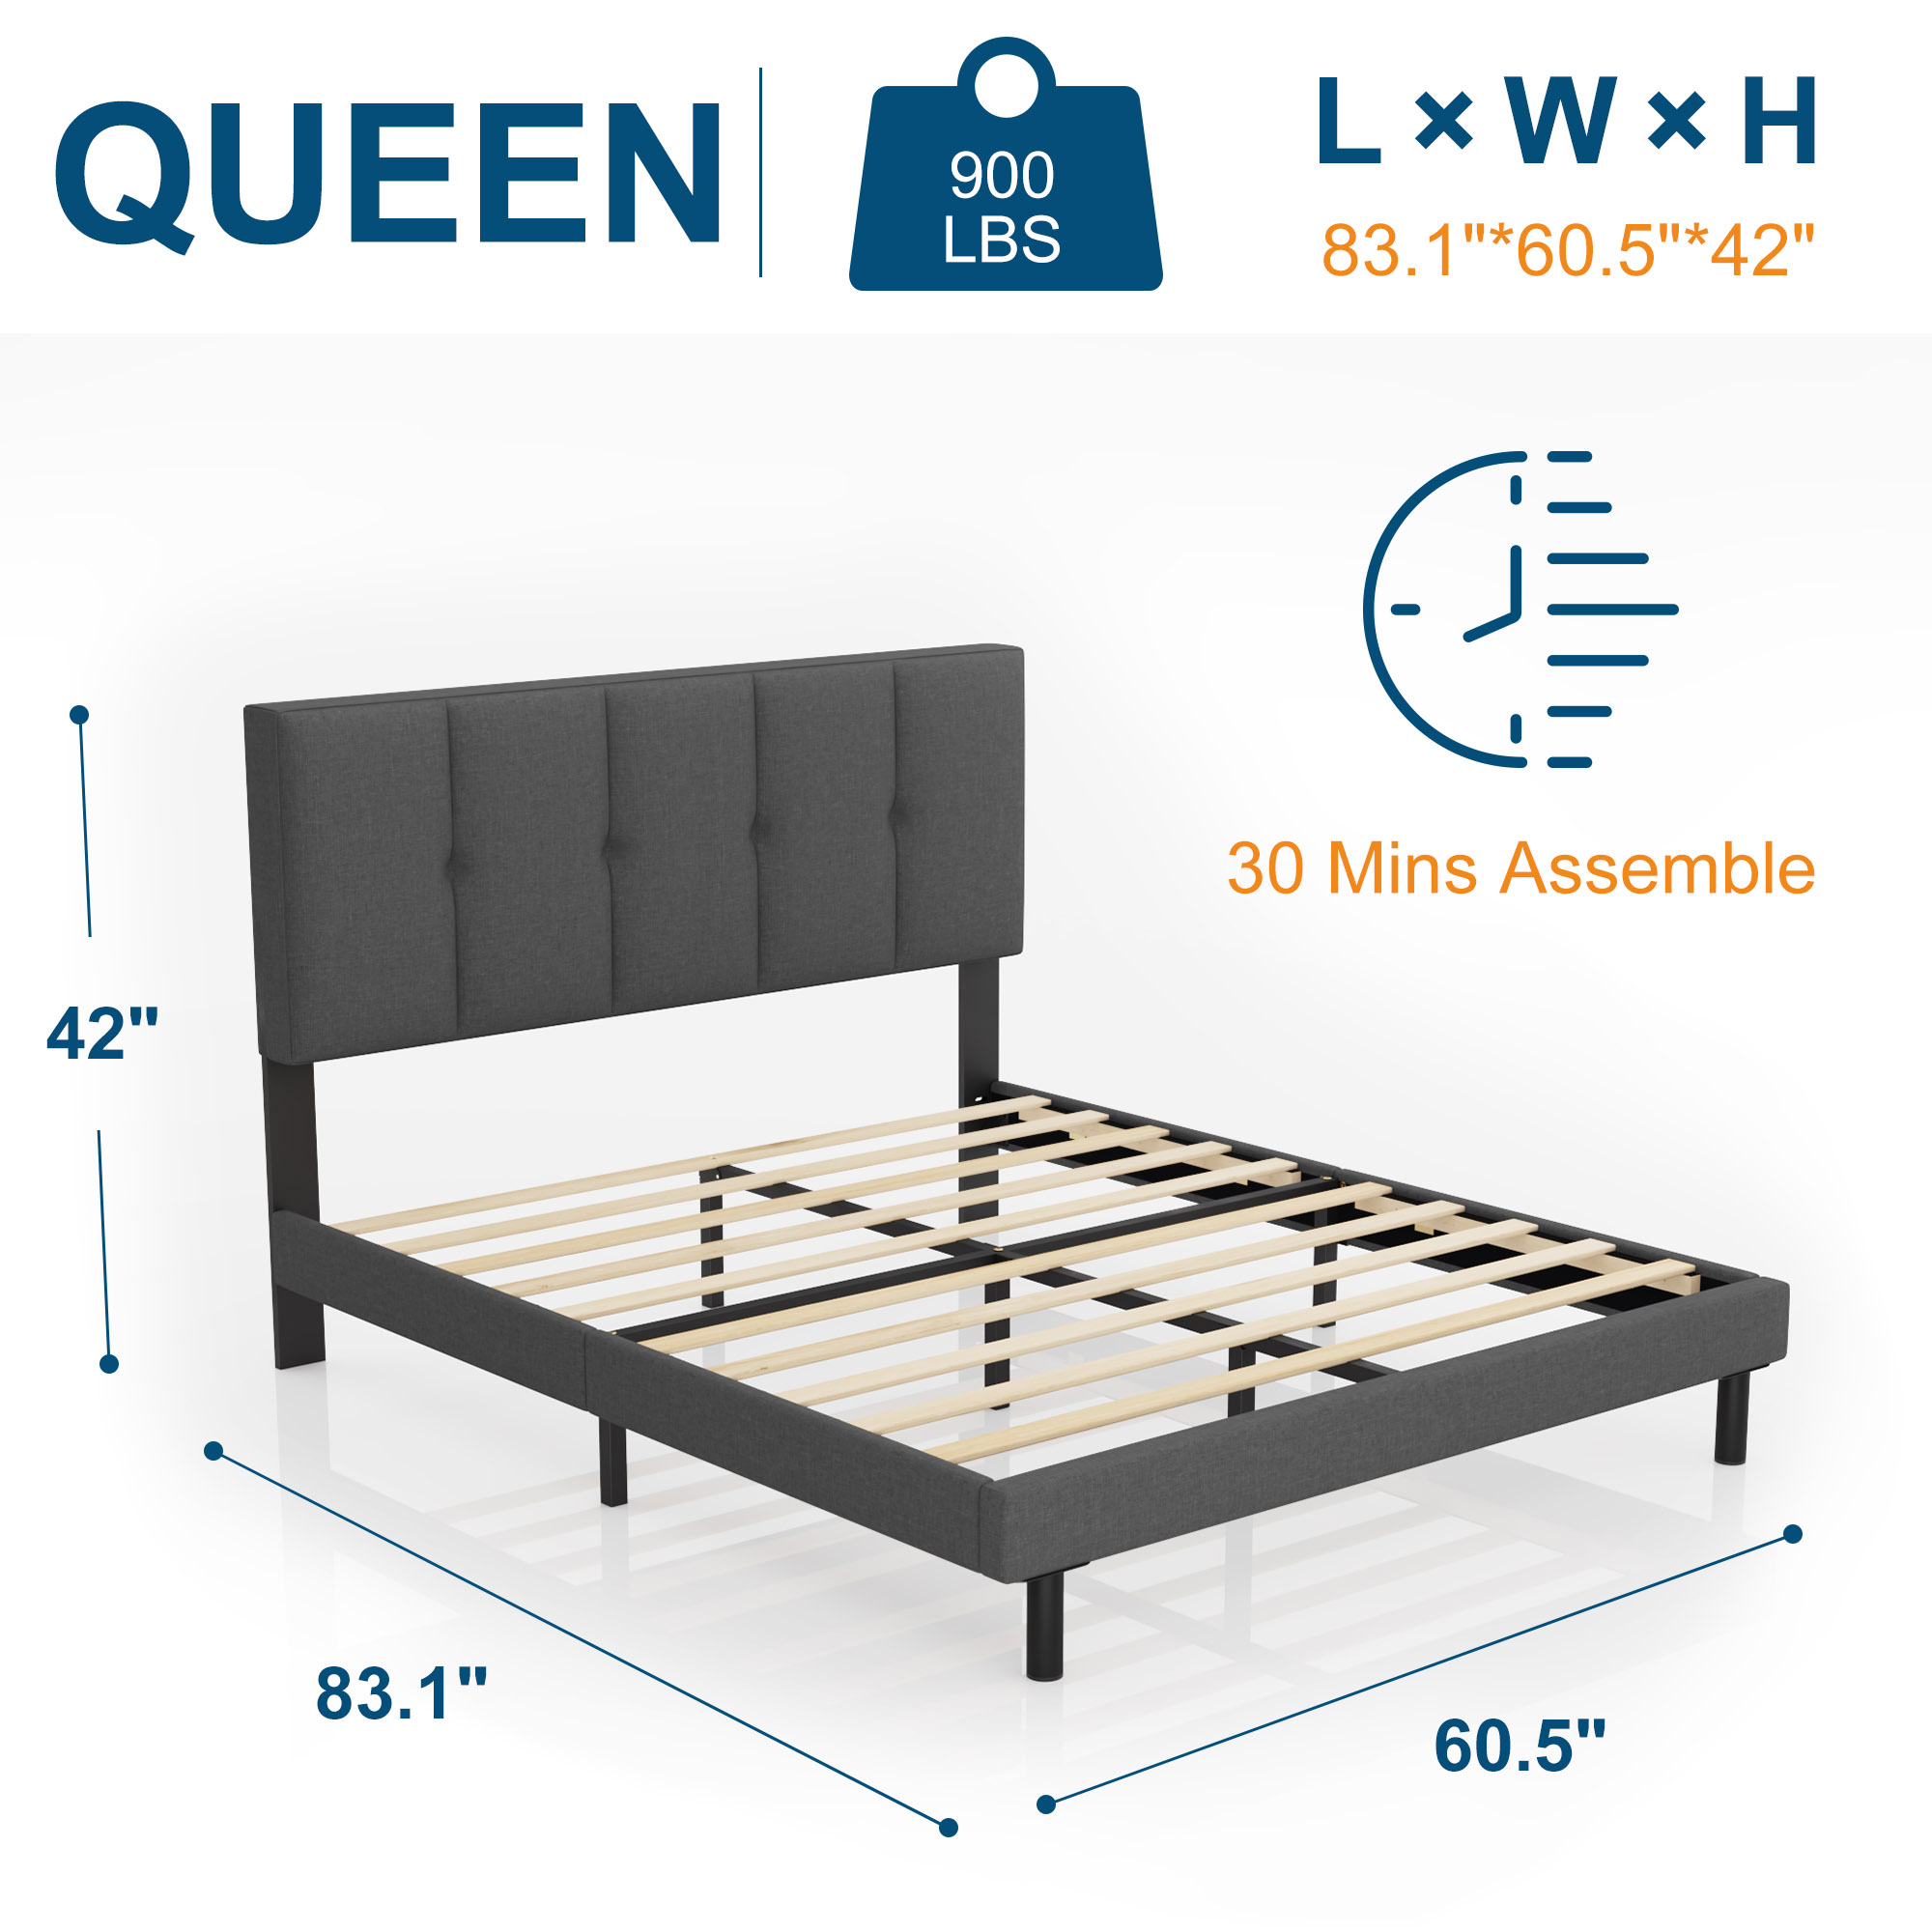 Queen bed, HAIIDE Queen Size Platform Bed Frame with Fabric Upholstered Headboard, No Box Spring Needed, Dark Grey - image 4 of 7